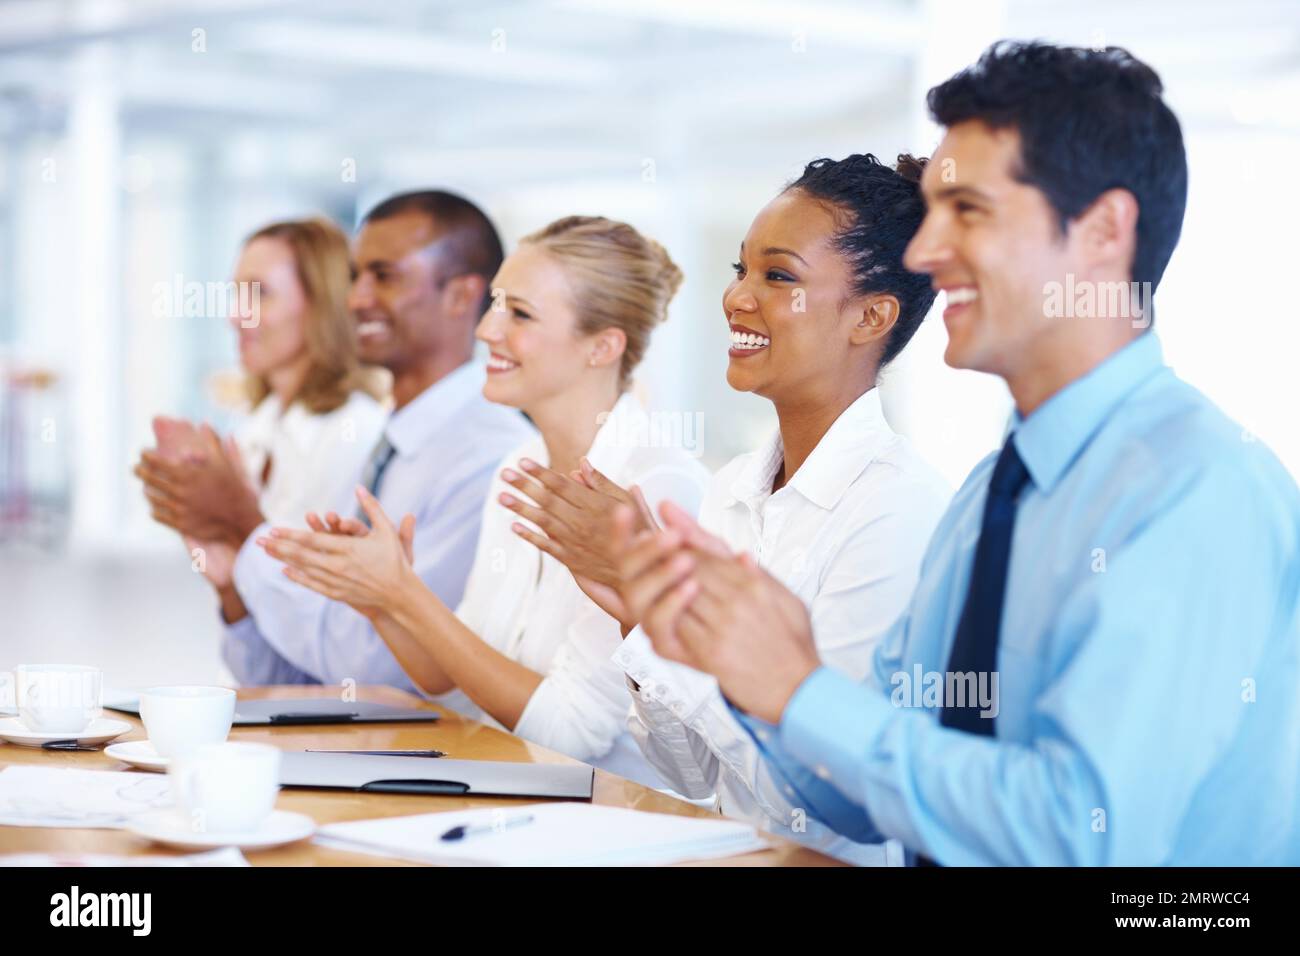 Successful presentation. Portrait of multi racial executives clapping after successful presentation. Stock Photo